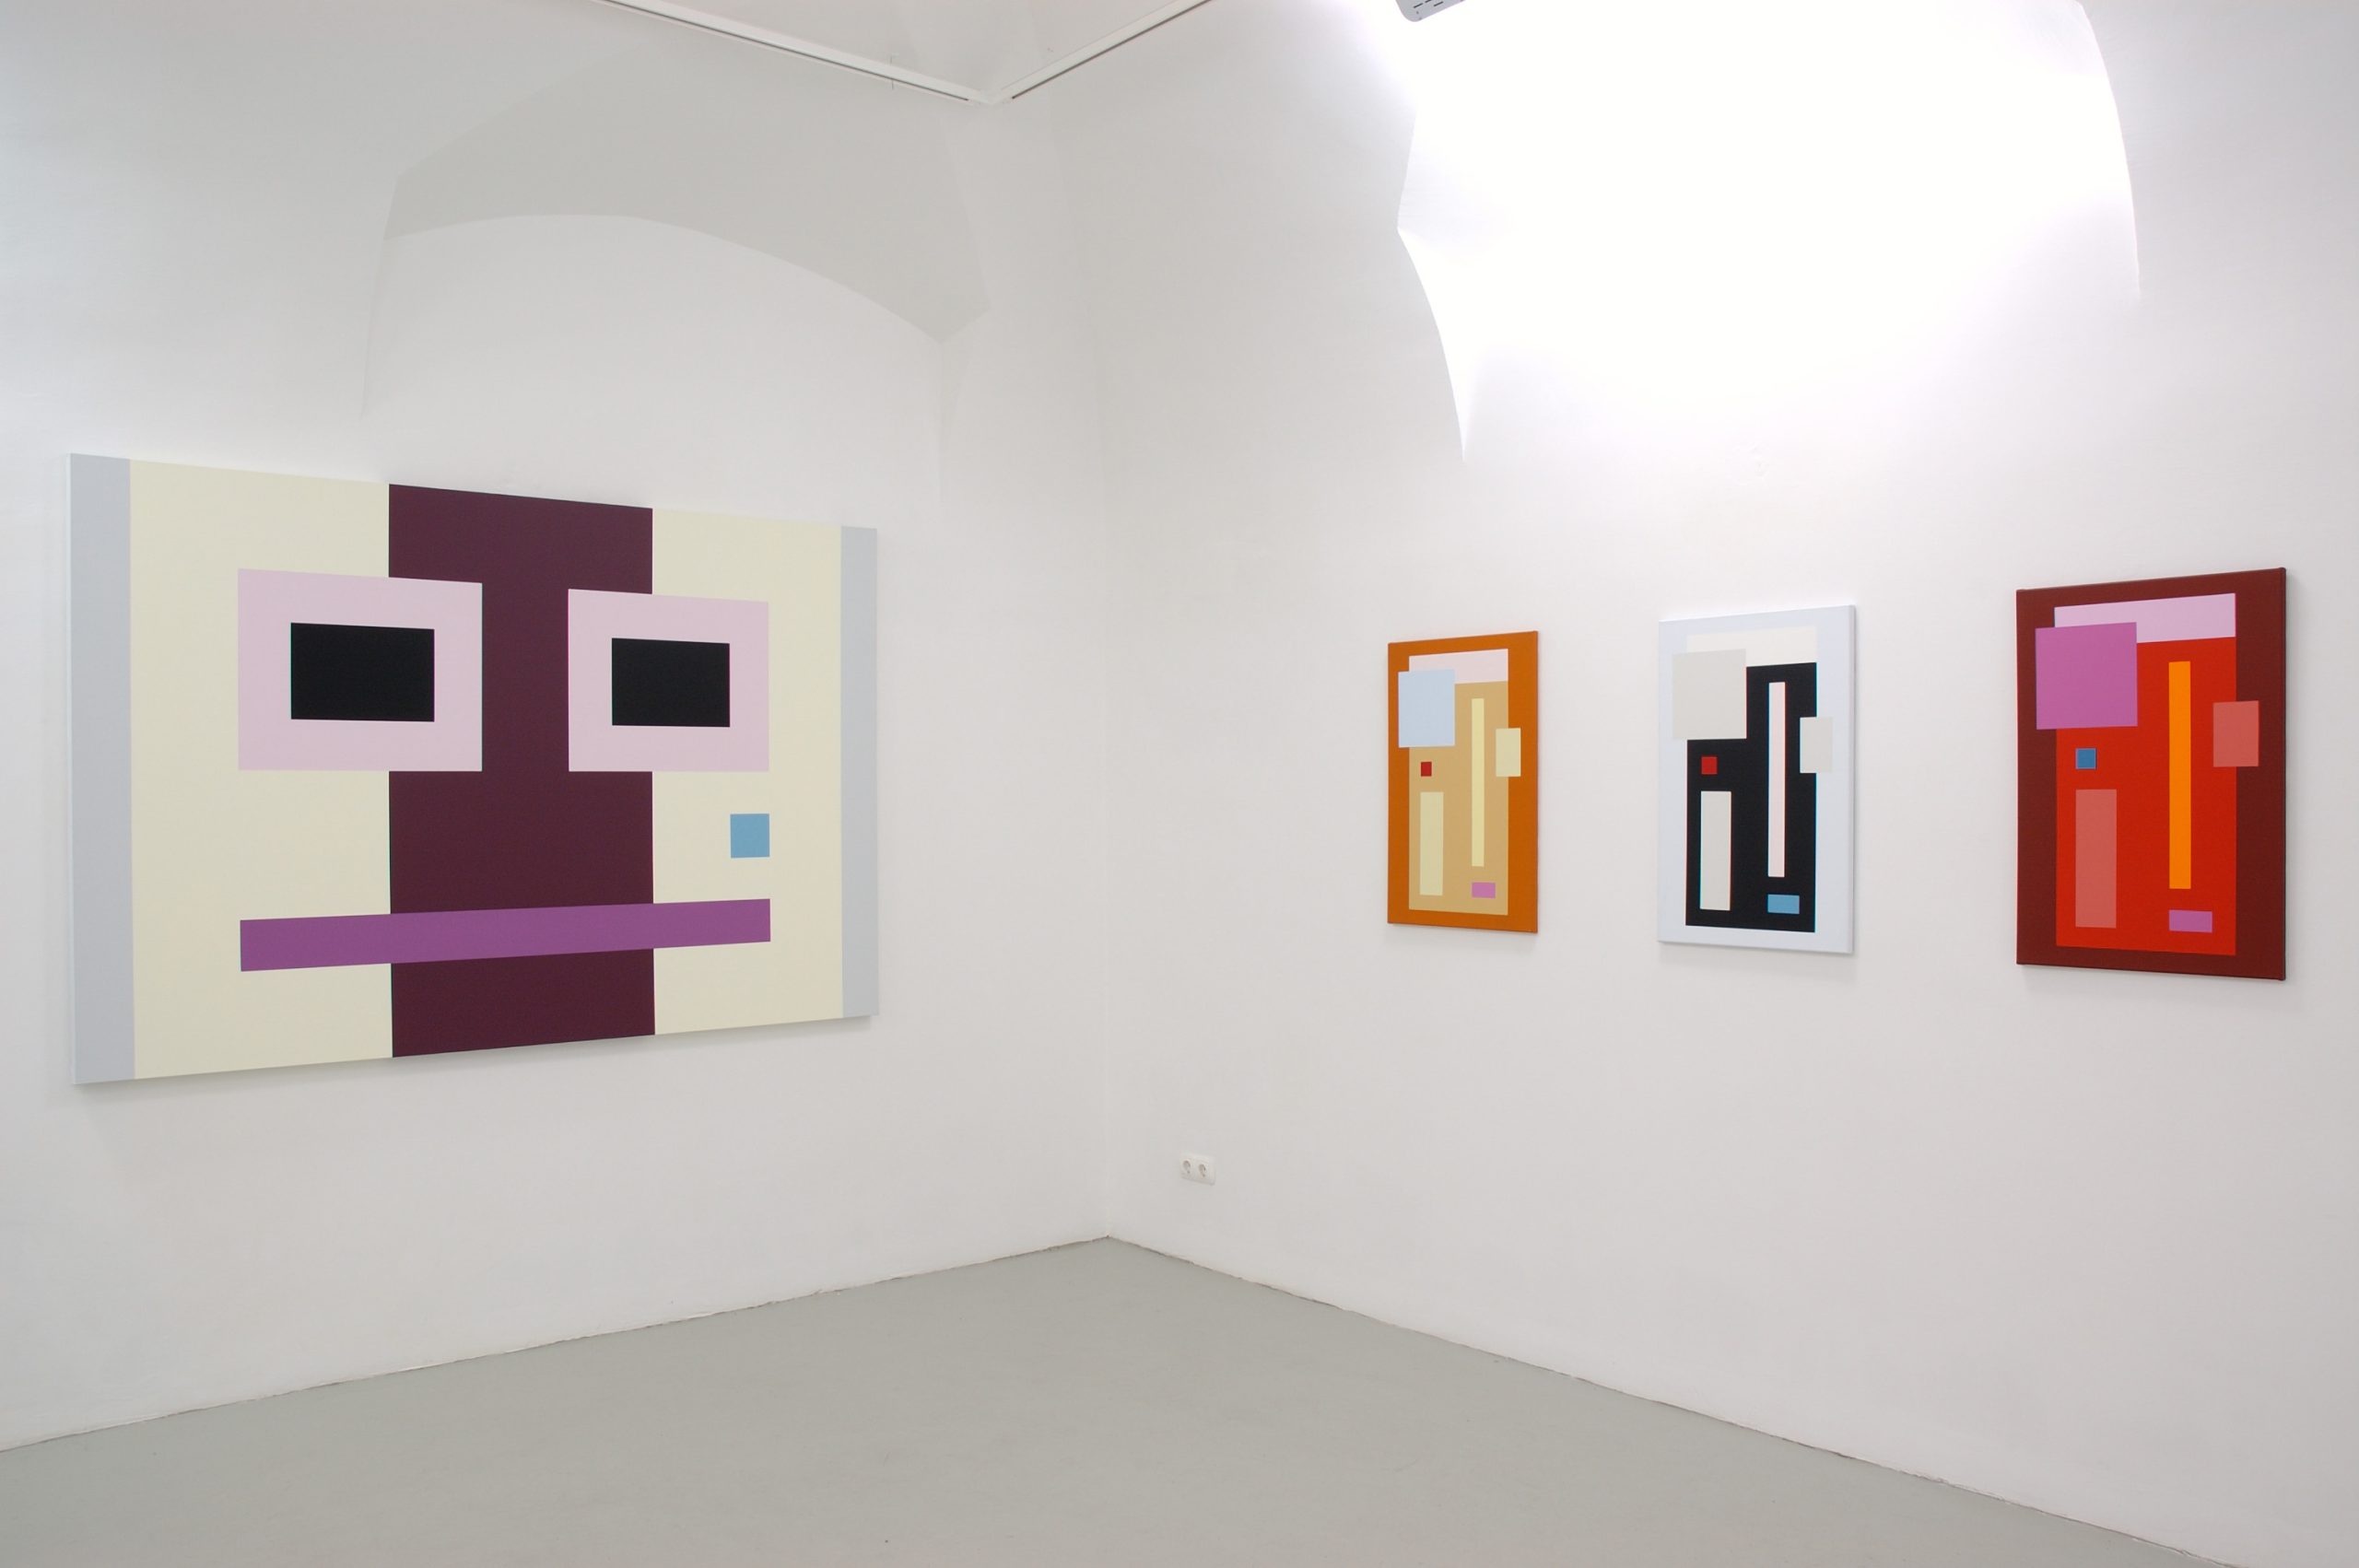 Installation view with works of Imre BAK, 2007, Kisterem